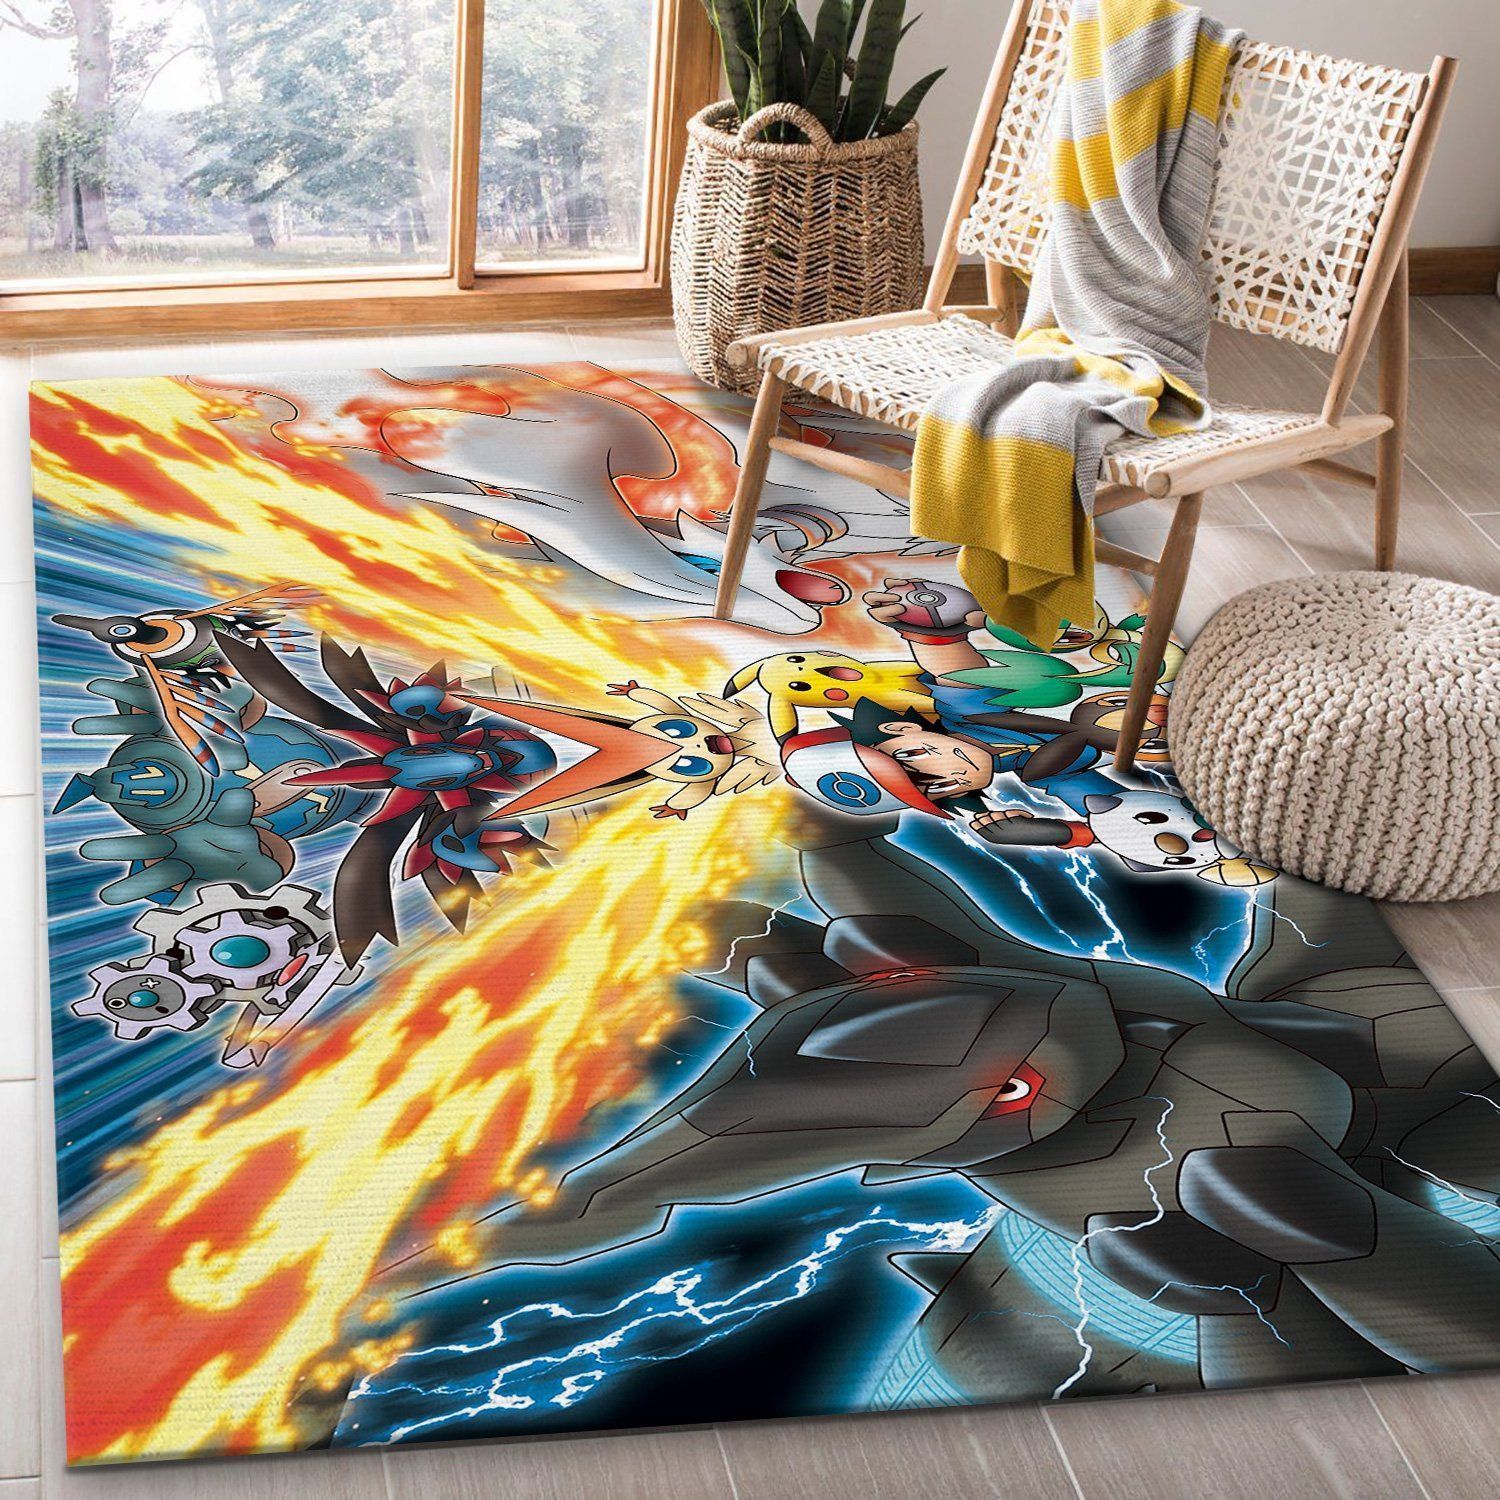 Pokemon Family Anime Movies Area Rugs Living Room Carpet FN031206 Local Brands Floor Decor The US Decor - Indoor Outdoor Rugs 1